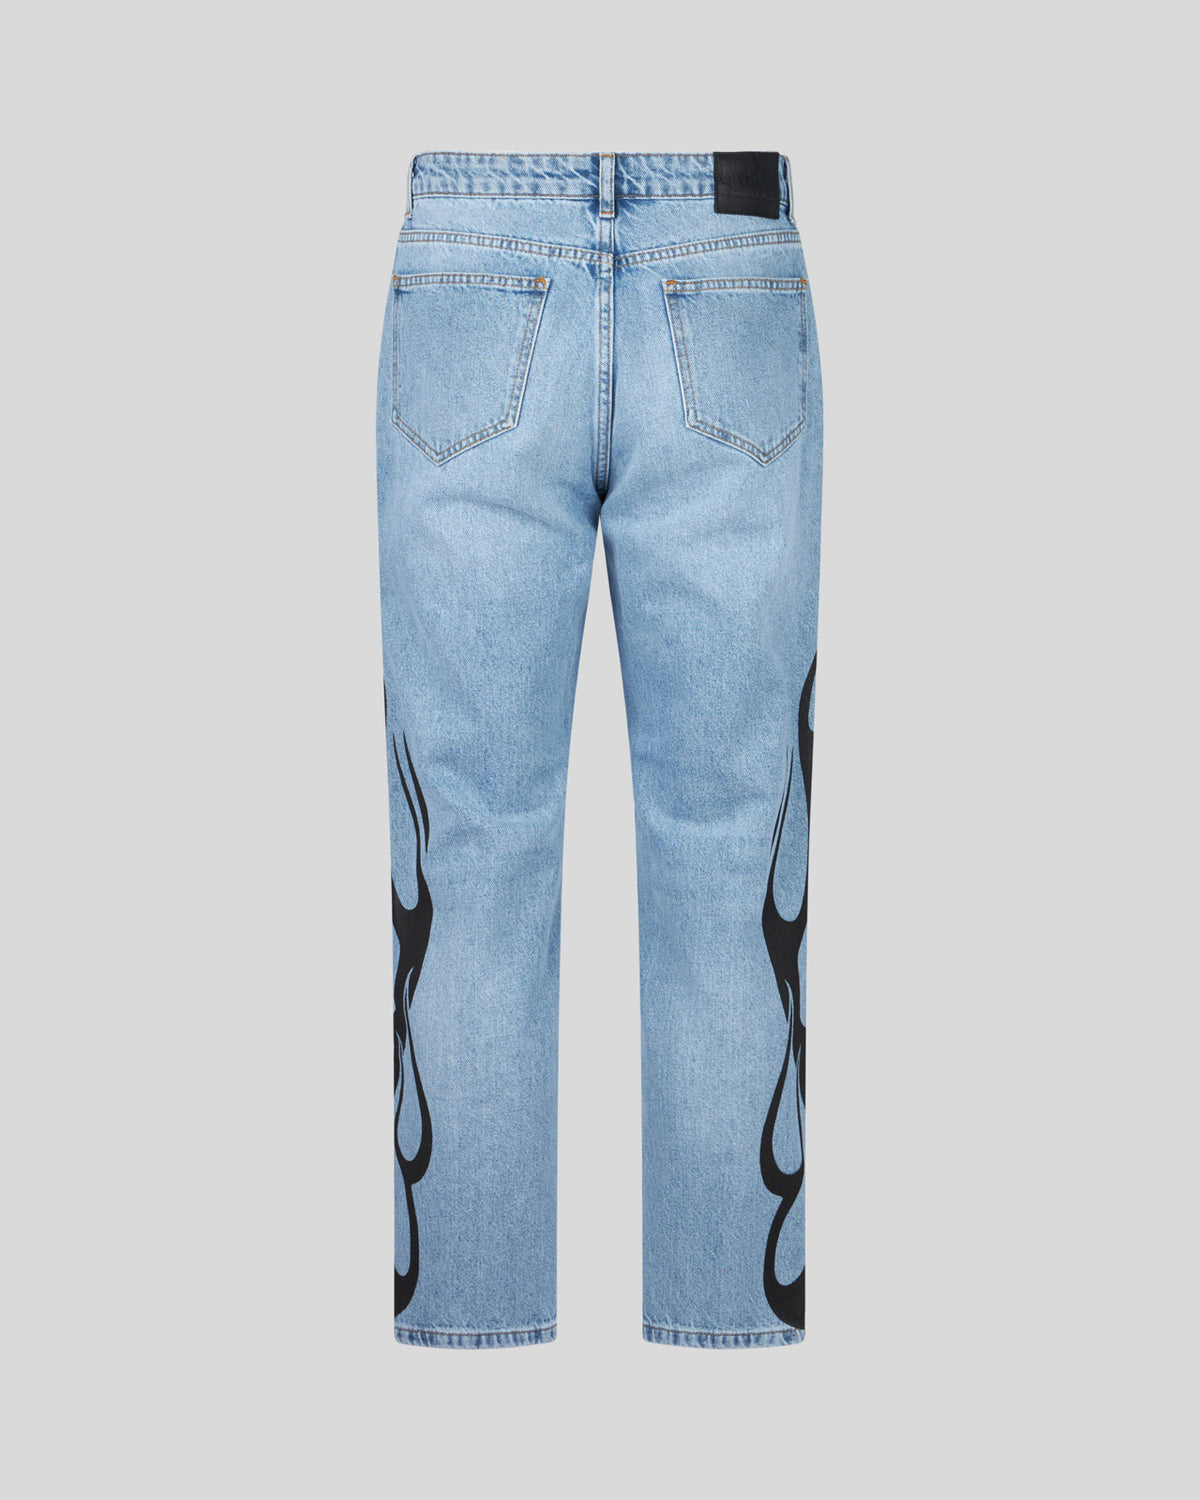 VISION OF SUPER BLUE JEANS WITH BLACK FLAMES